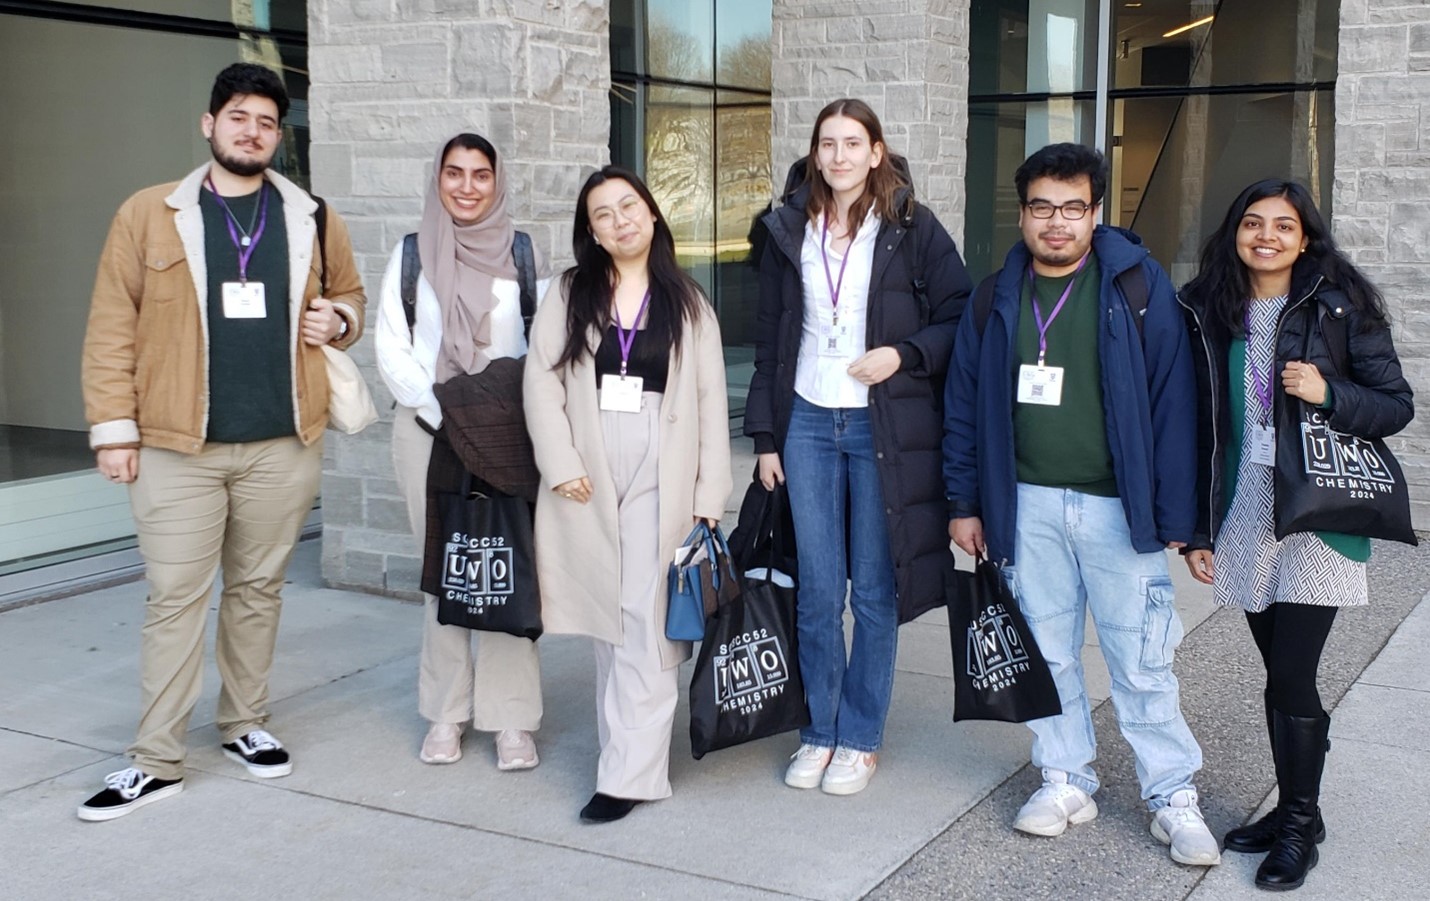 Undergraduate Chemistry and Biochemistry students showcase their research at provincial conference